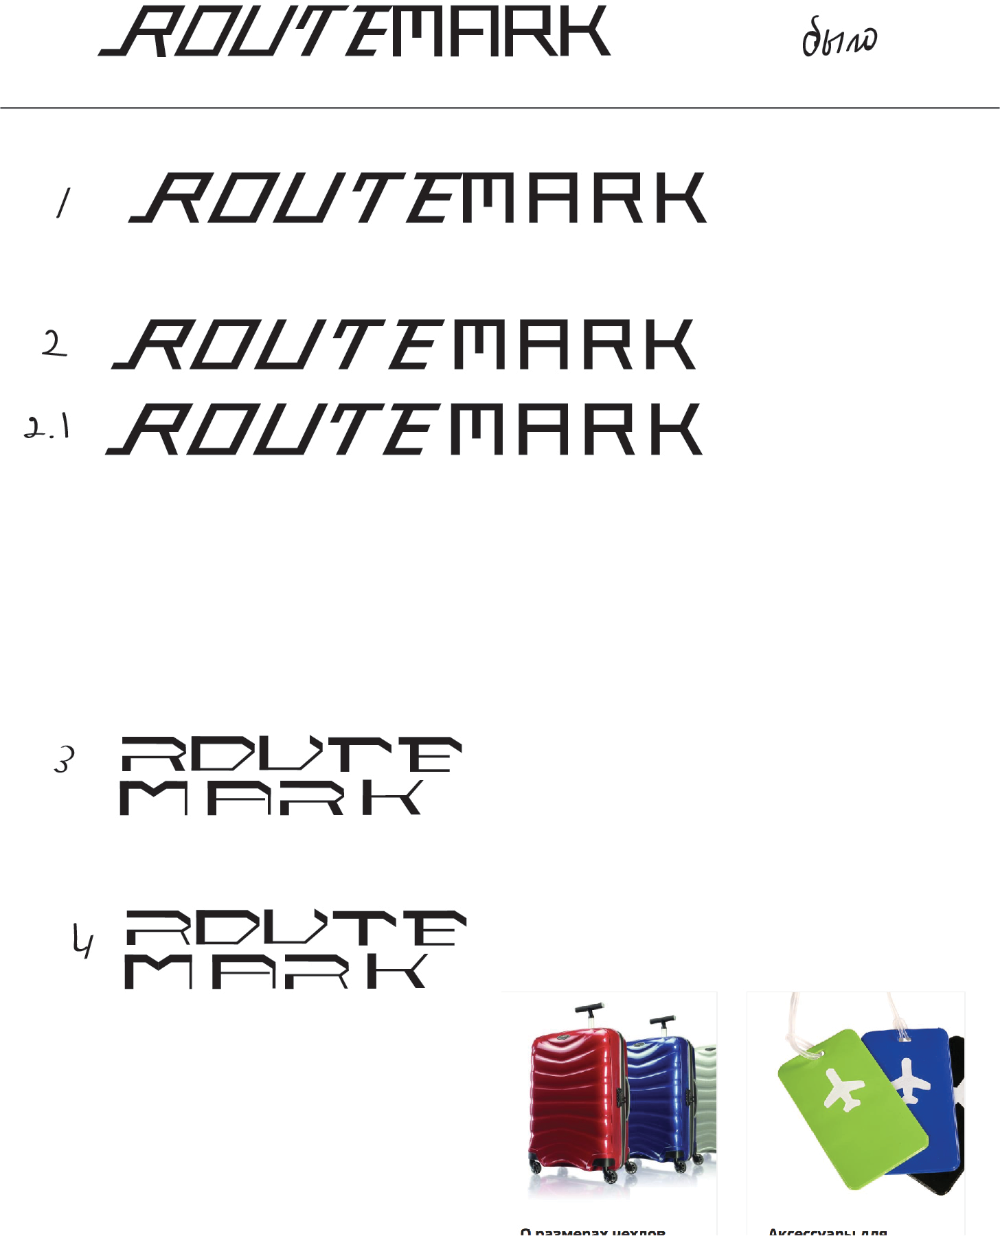 routemark process 05